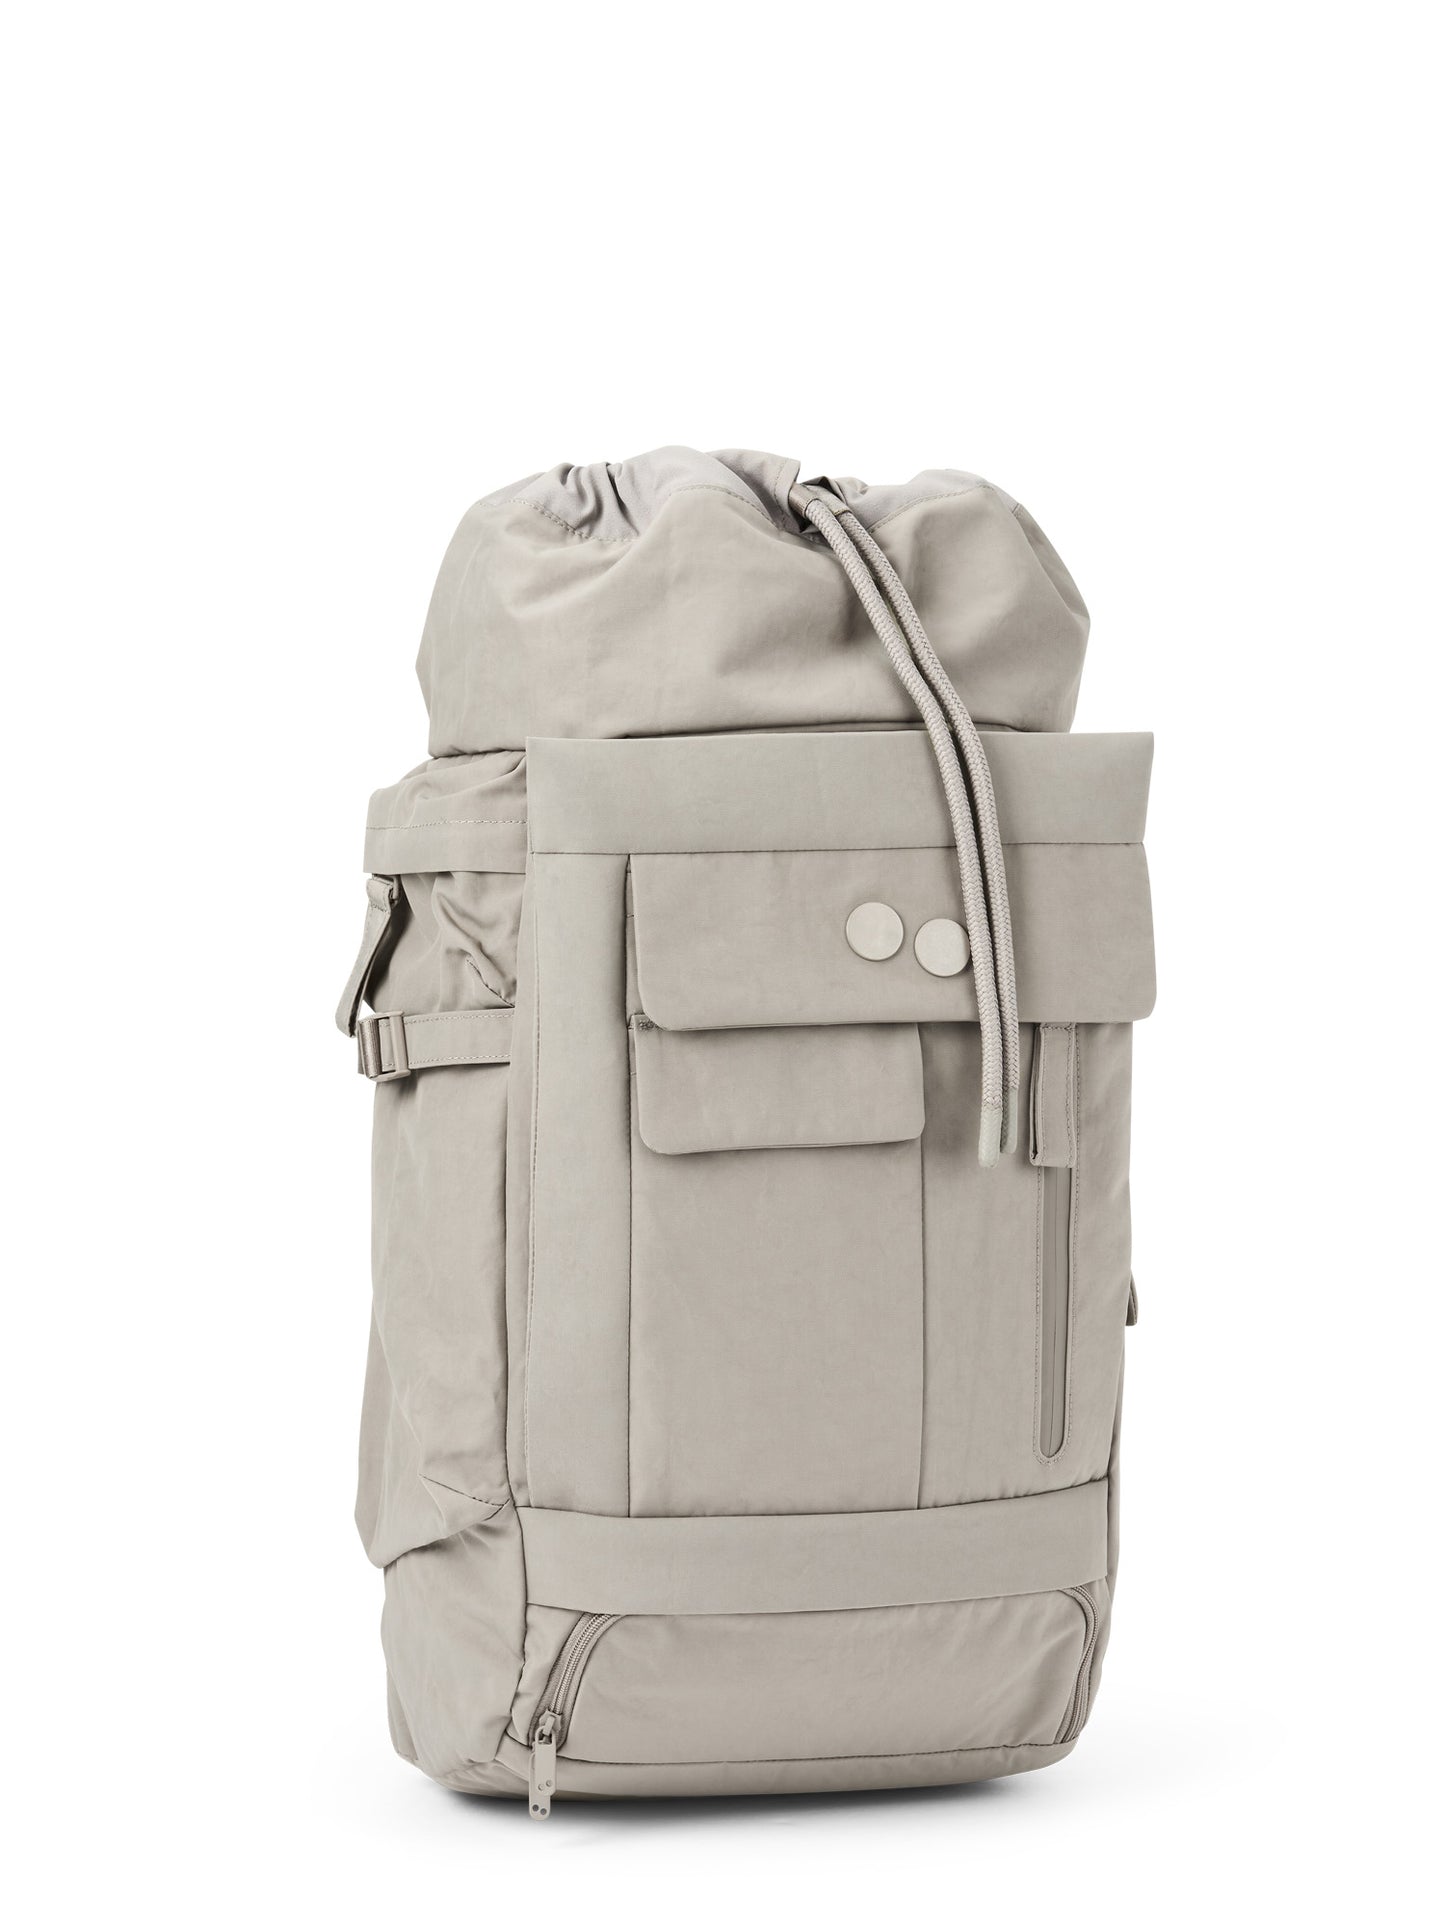 pinqponq-backpack-Blok-Medium-Crinkle-Taupe-front